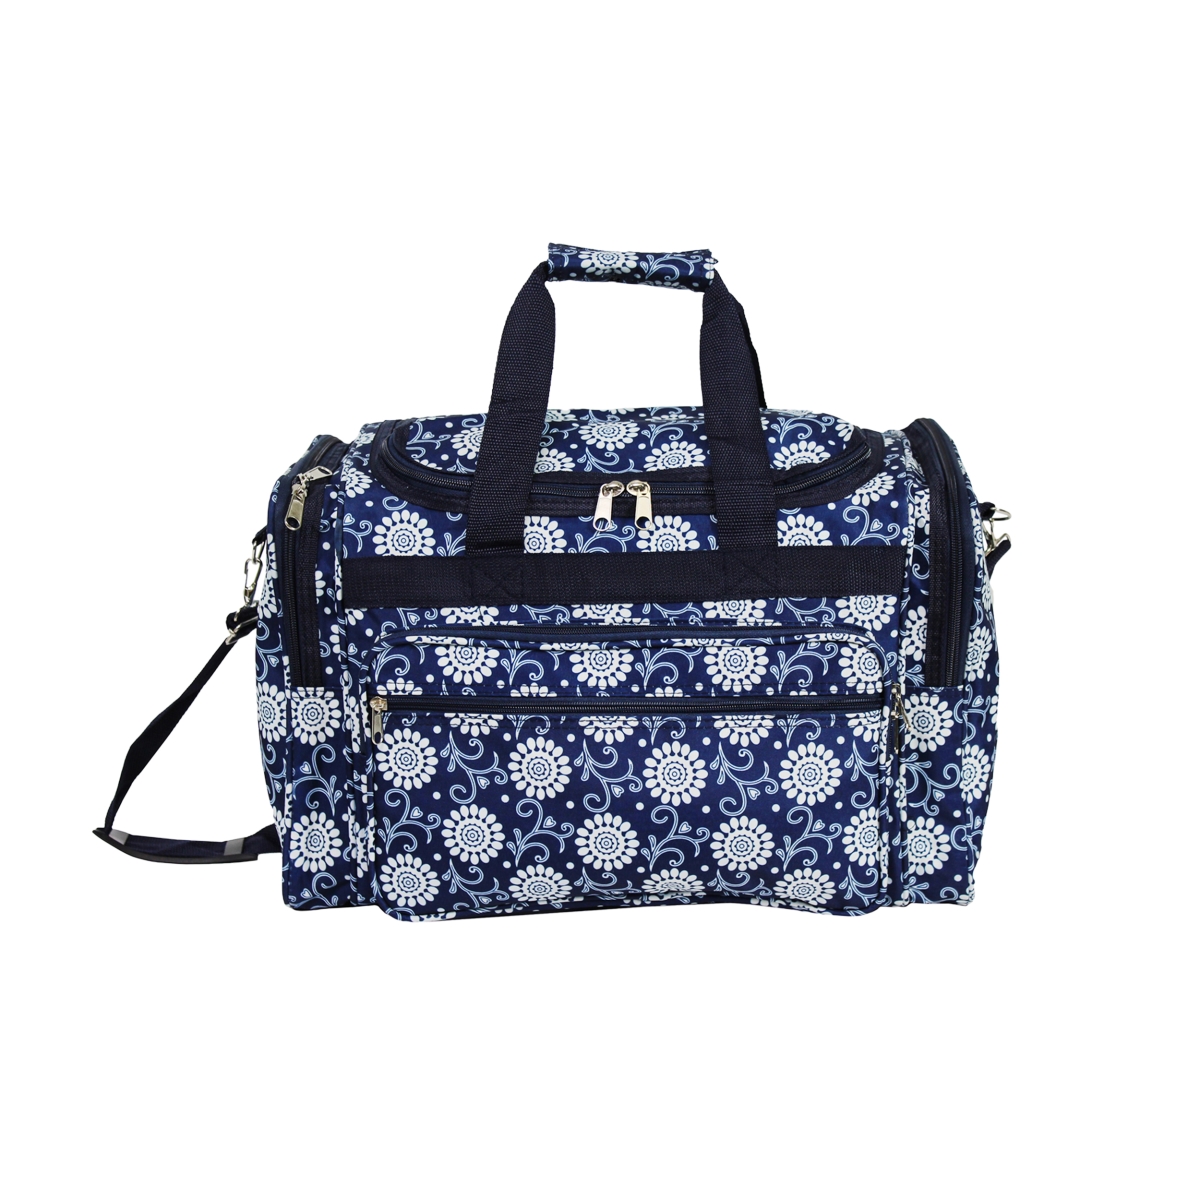 81t16-229 16 In. Carry-on Duffel Bag - Navy Vines Floral